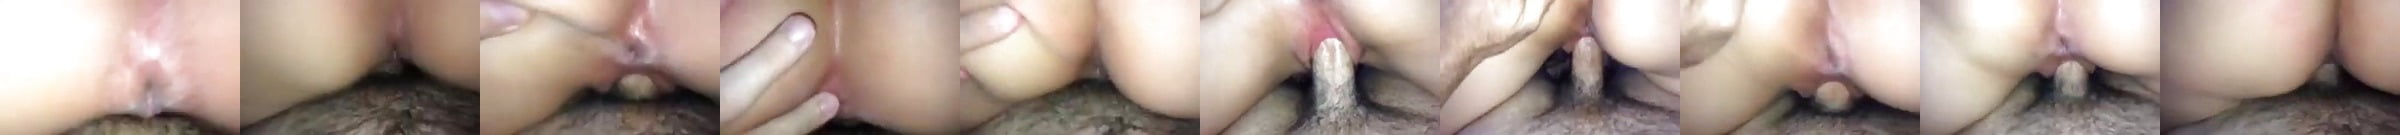 Had To Sample That Wet Fat Gushy Pussy Porn 4c XHamster